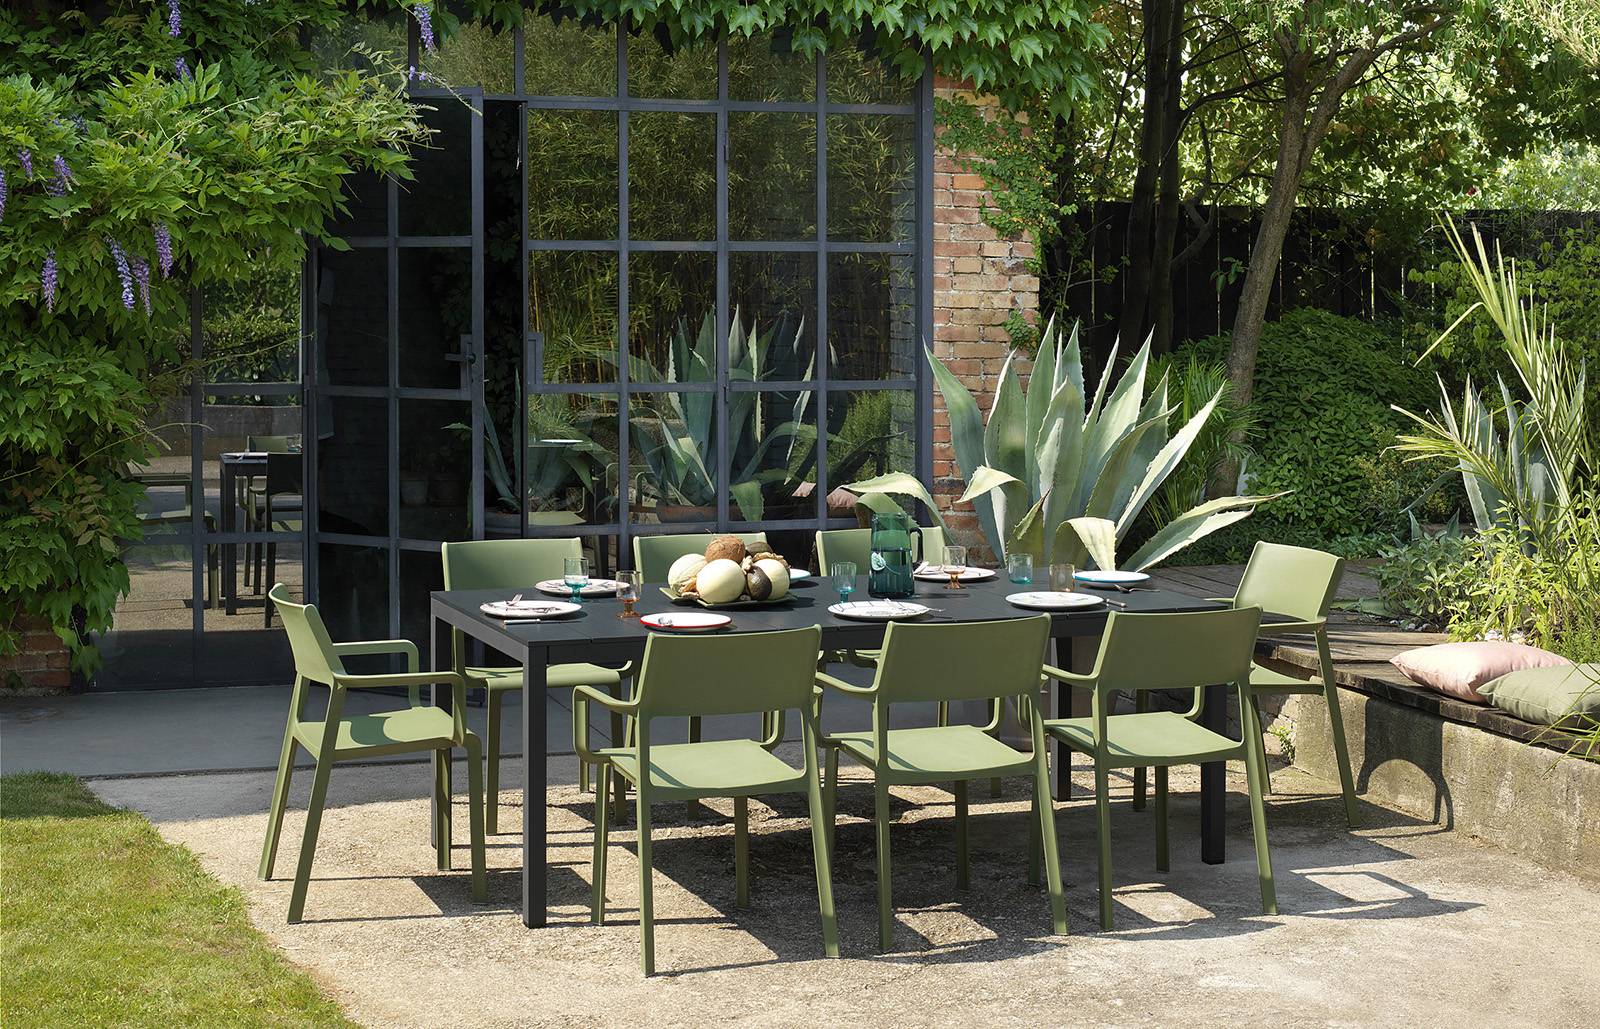 Nardi Trill Outdoor Armchair in olive green outdoor setting with table and setting